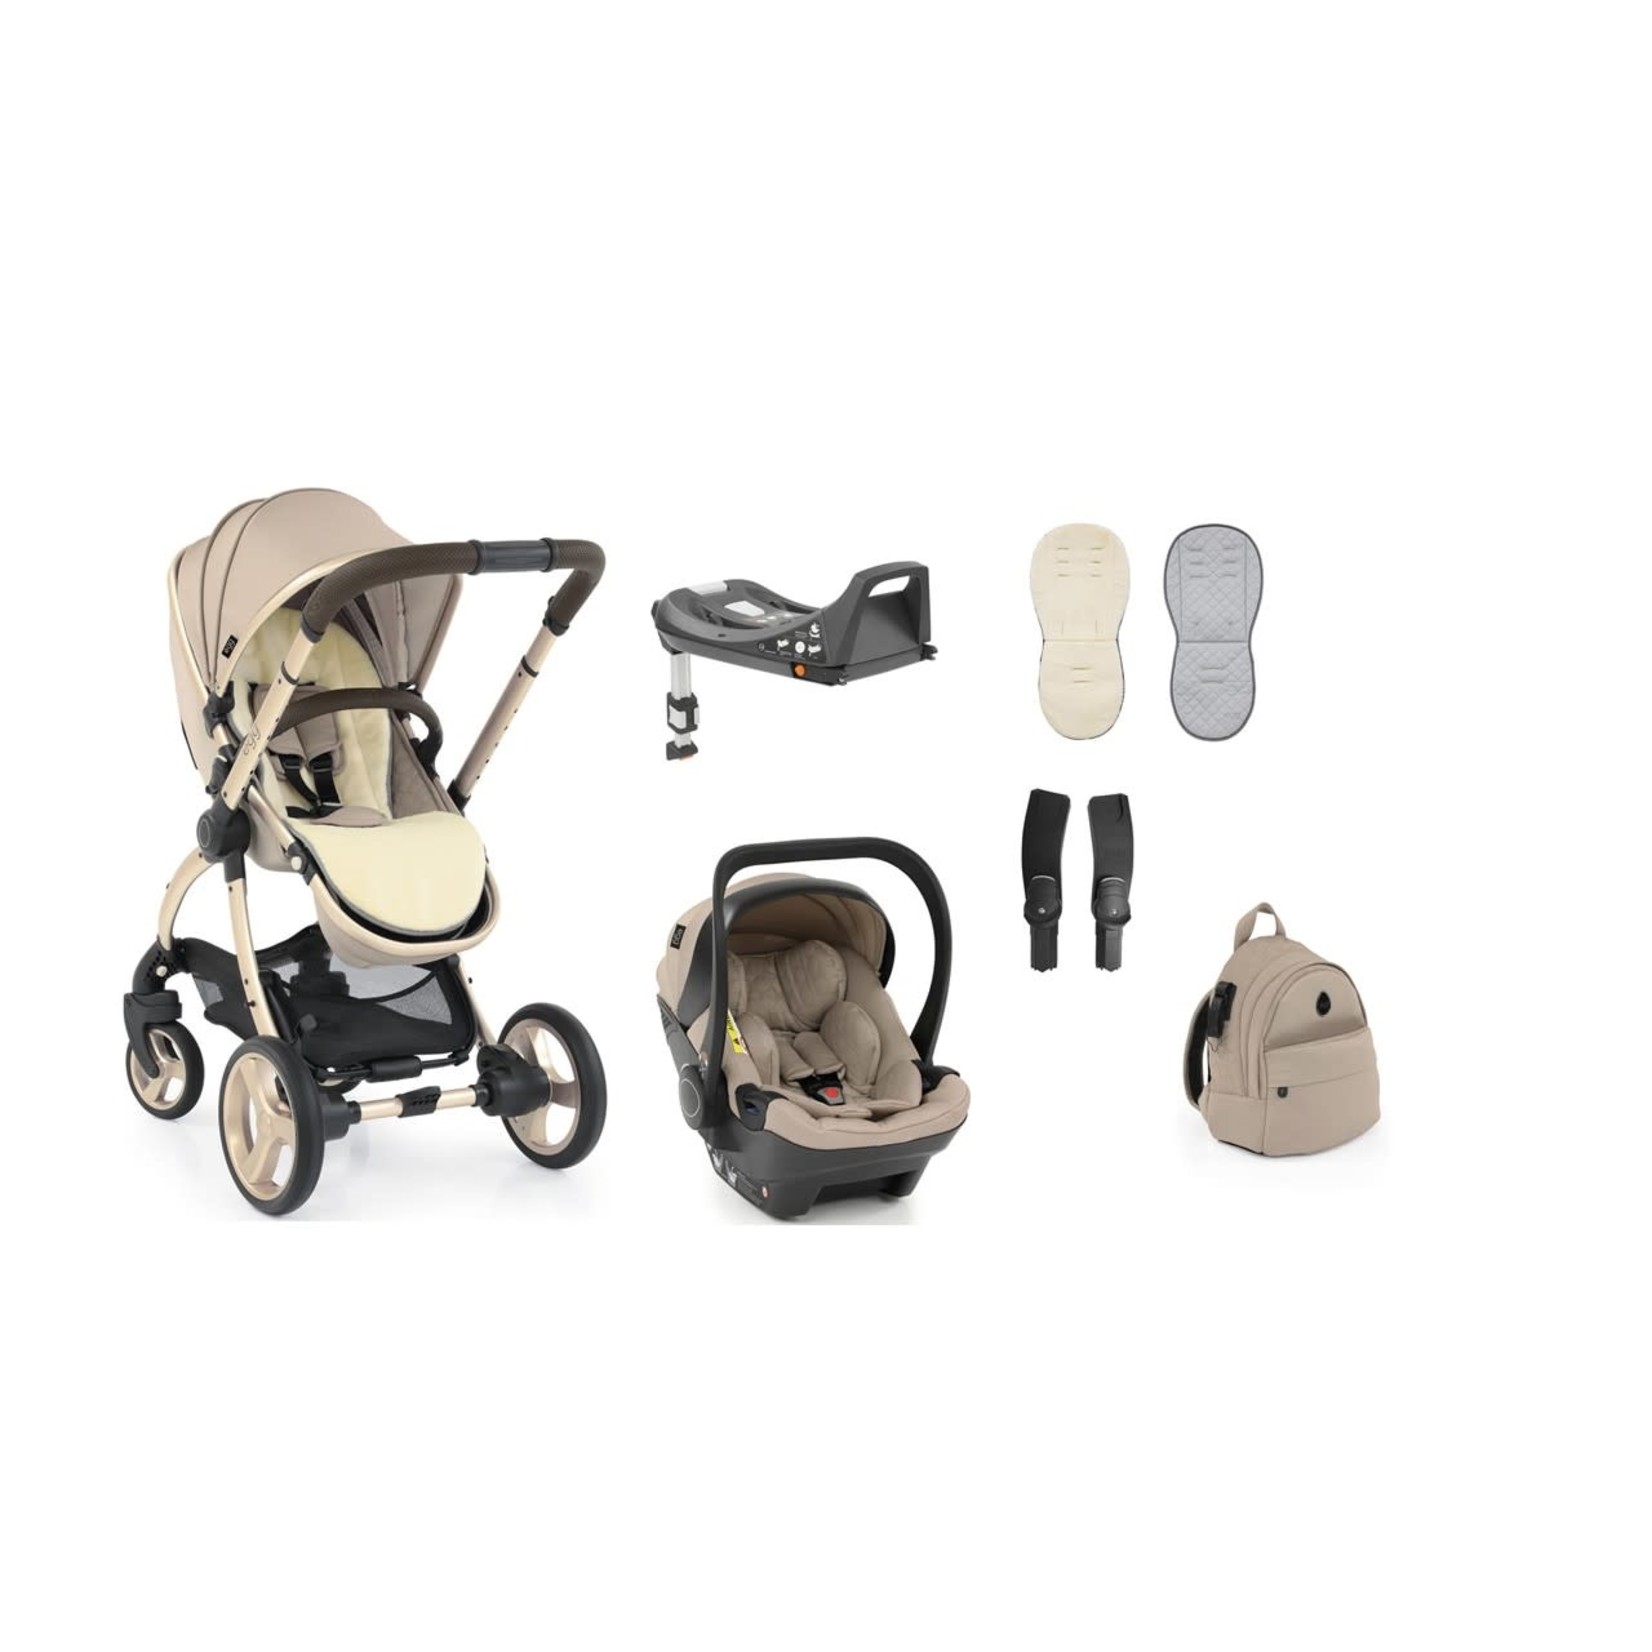 EGG EGG 2 ( 2 IN 1 ) INFANT CARSEAT TRAVEL SYSTEM  inc. ISOFIX - FEATHER